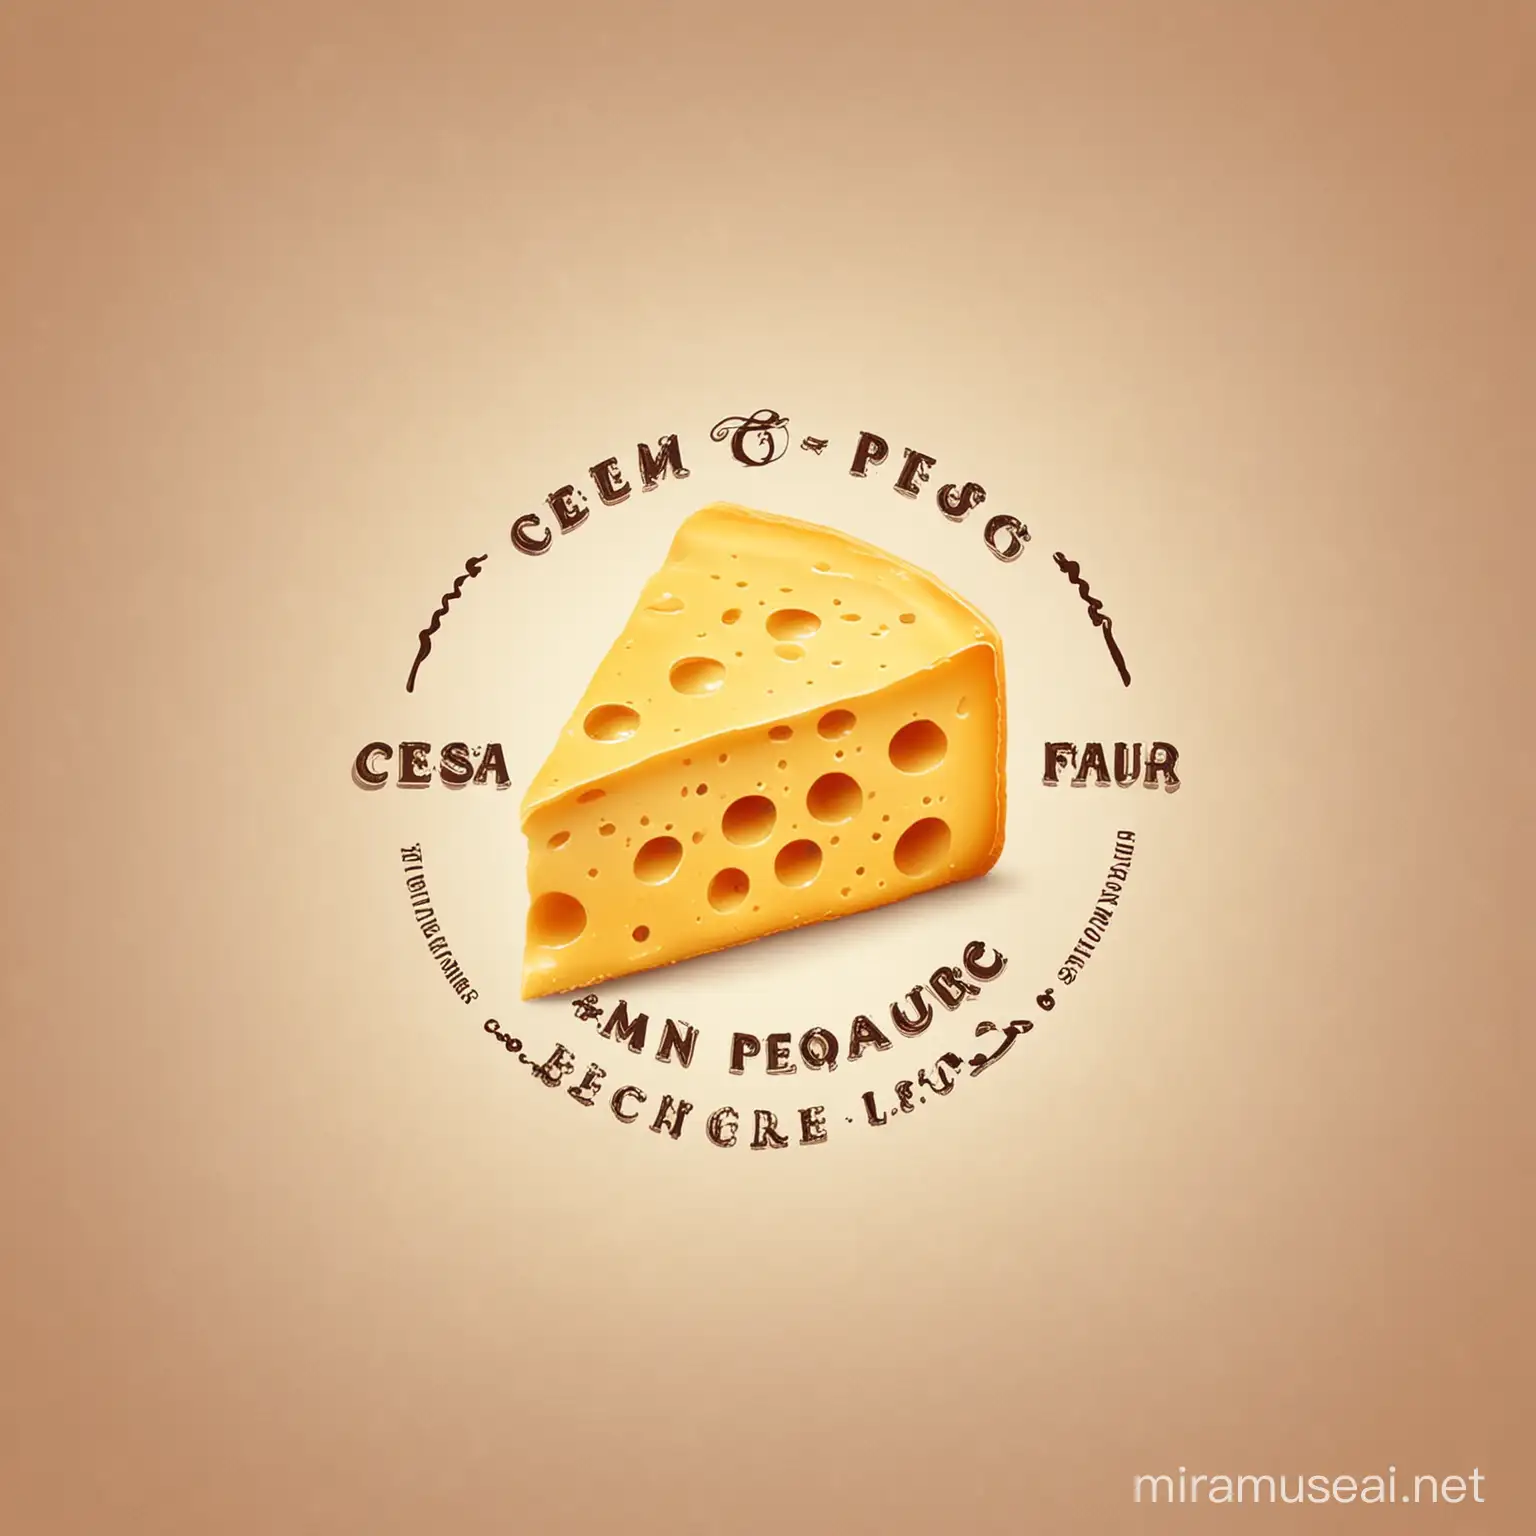 Create a logo for a cheese factory with a slice of cheese with a drop of milk protruding from the cheese.